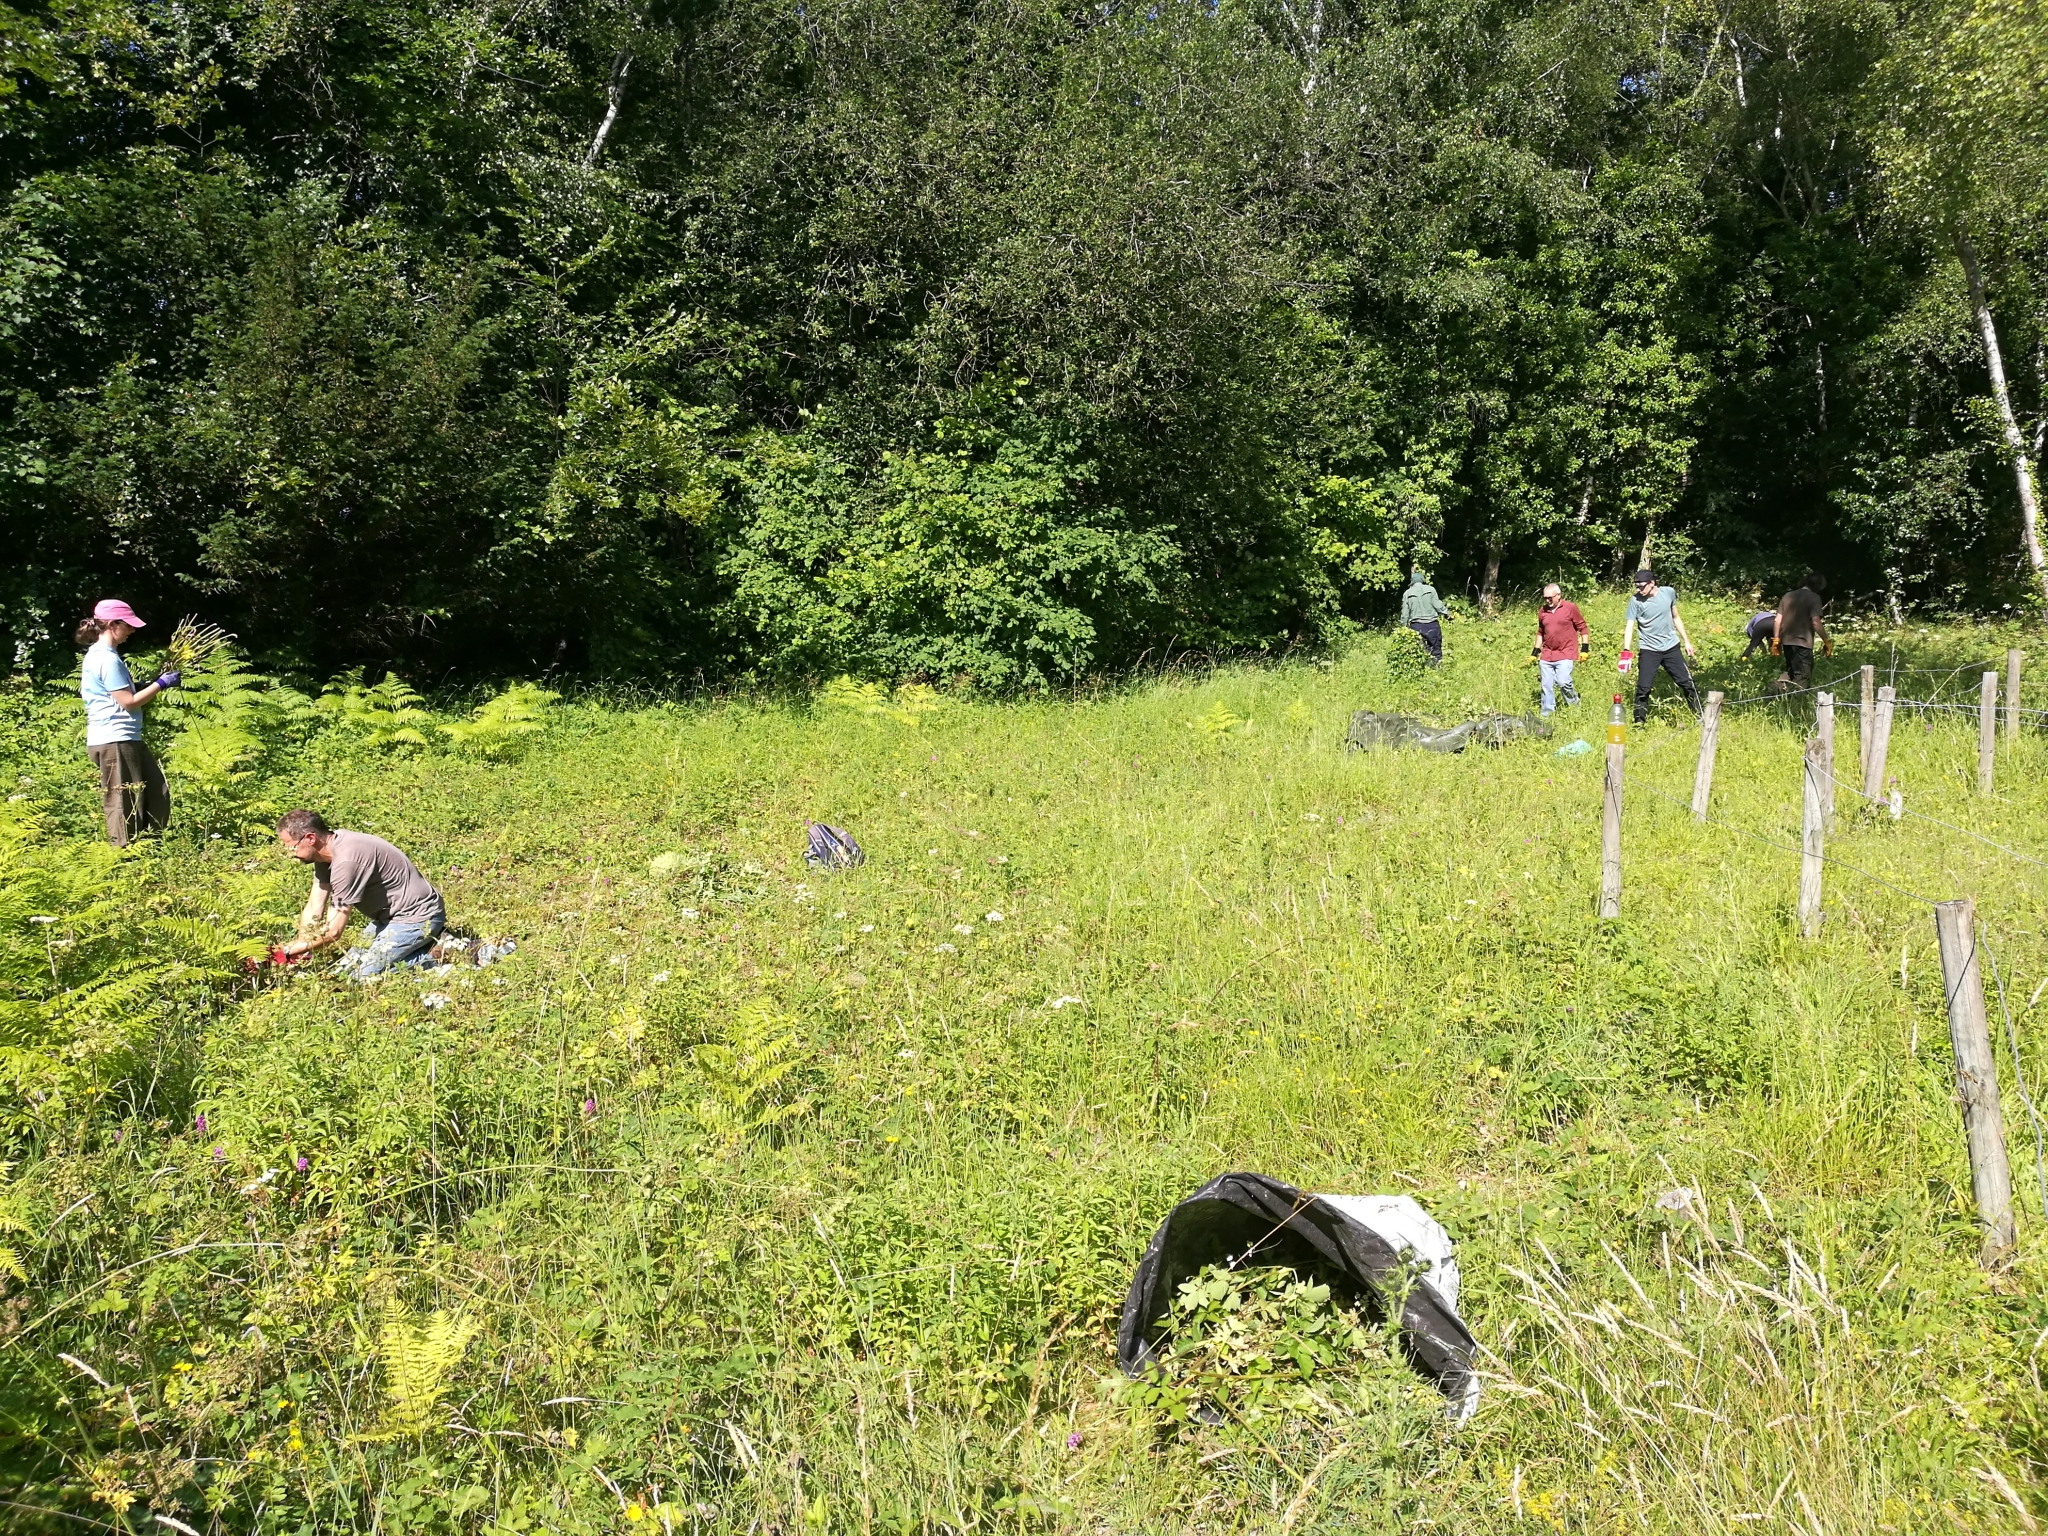 A photo from the FoTF Conservation Event - July 2021 - Maintenance tasks at Rex Graham Reserve : A shot from the bottom of the reserve showing volunteers working in the background